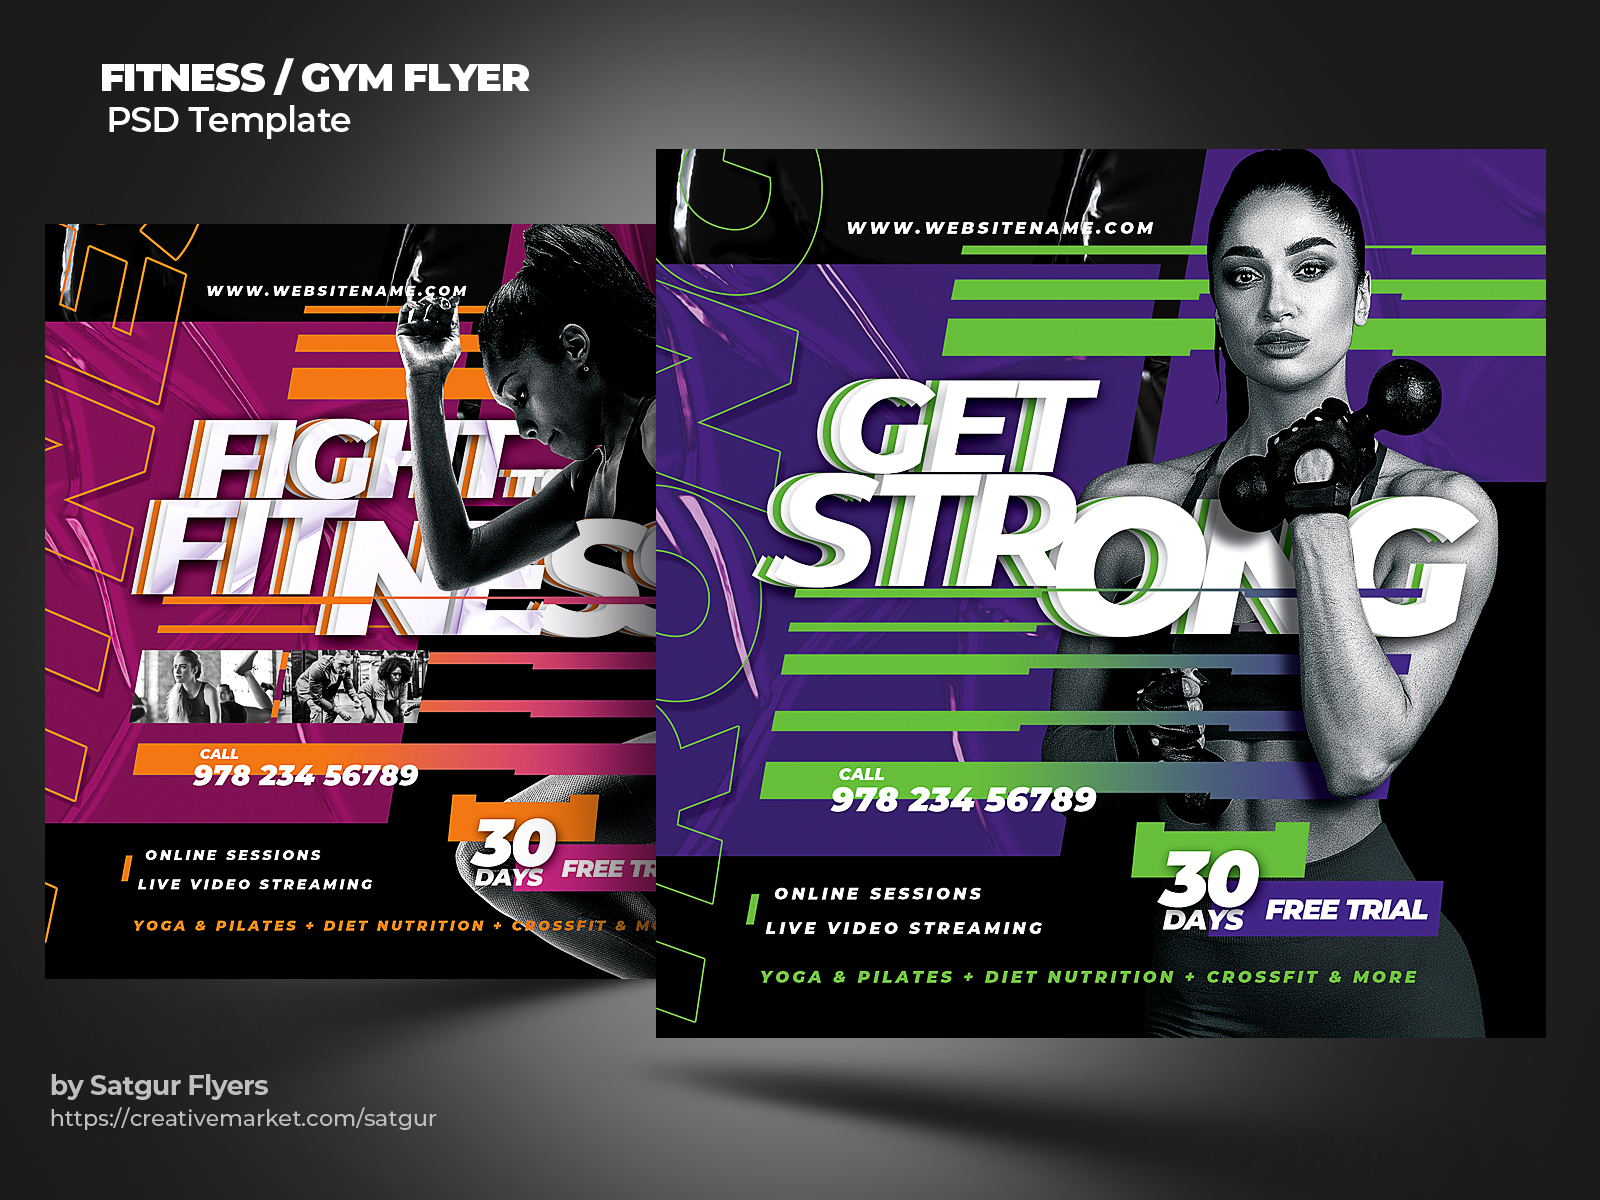 Personal Training Fitness Flyer Templates from GraphicRiver